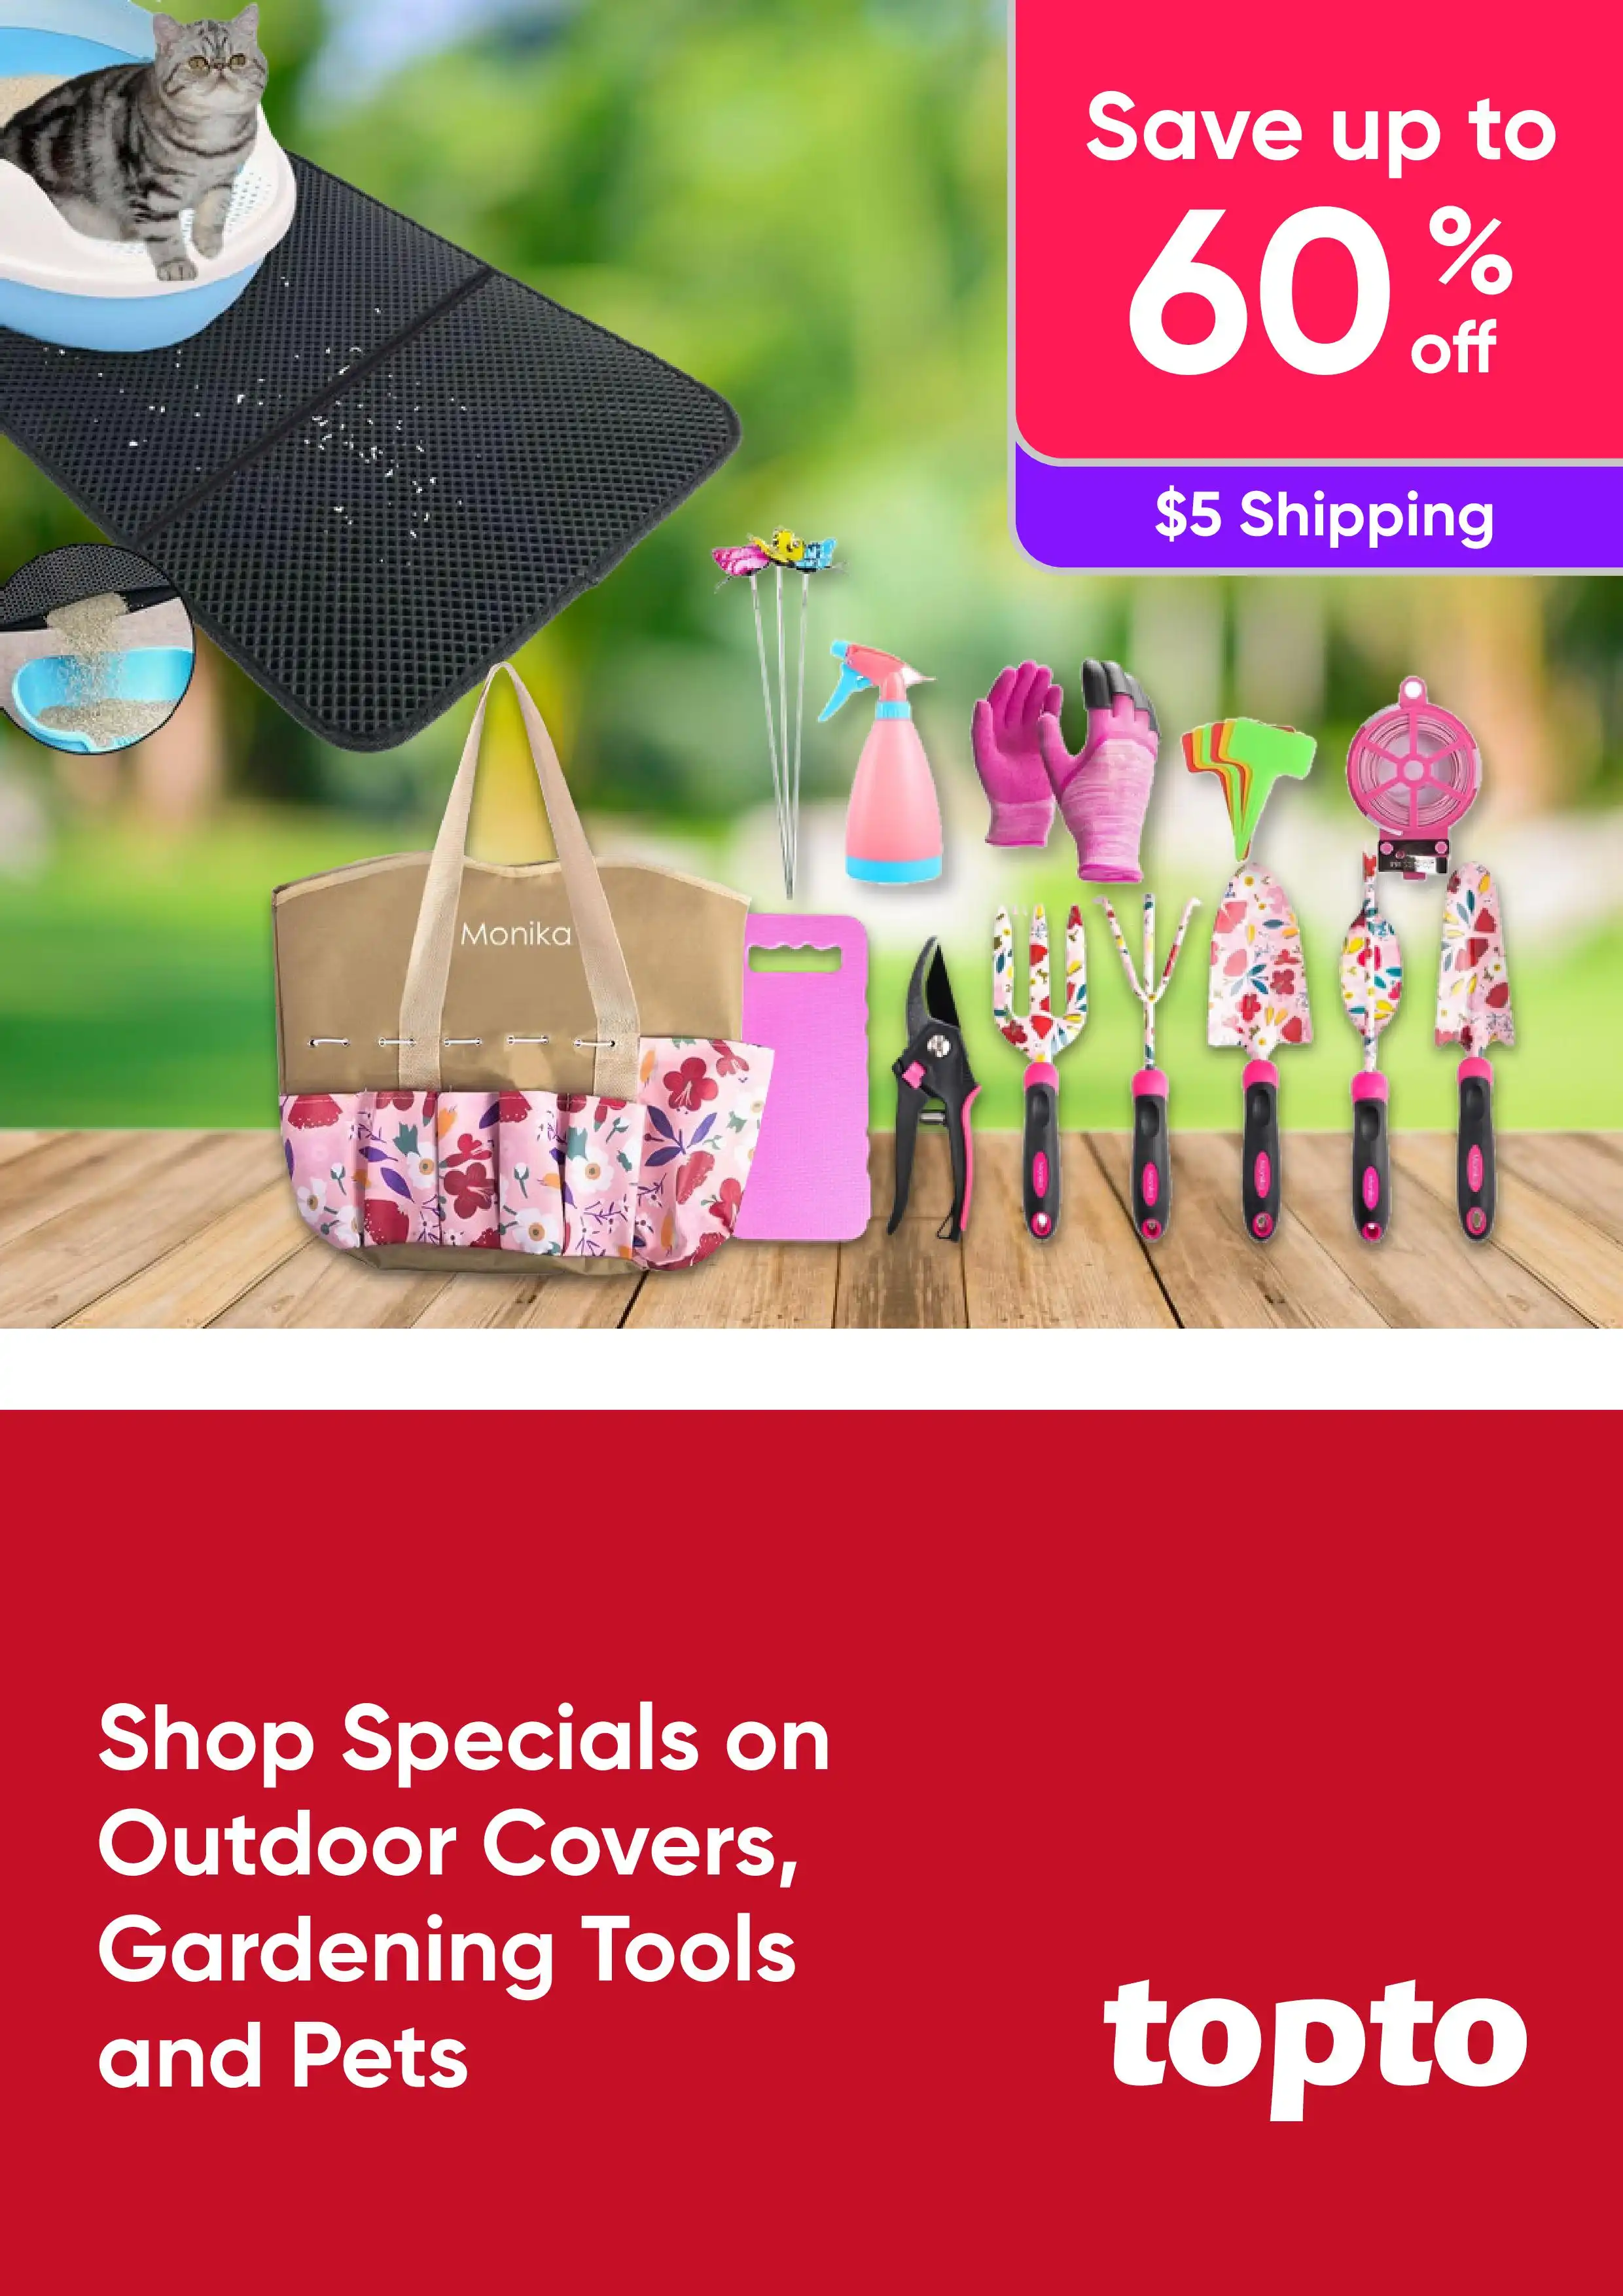 Shop Specials on Outdoor Covers, Gardening Tools and Pets - Save Up To 60% Off